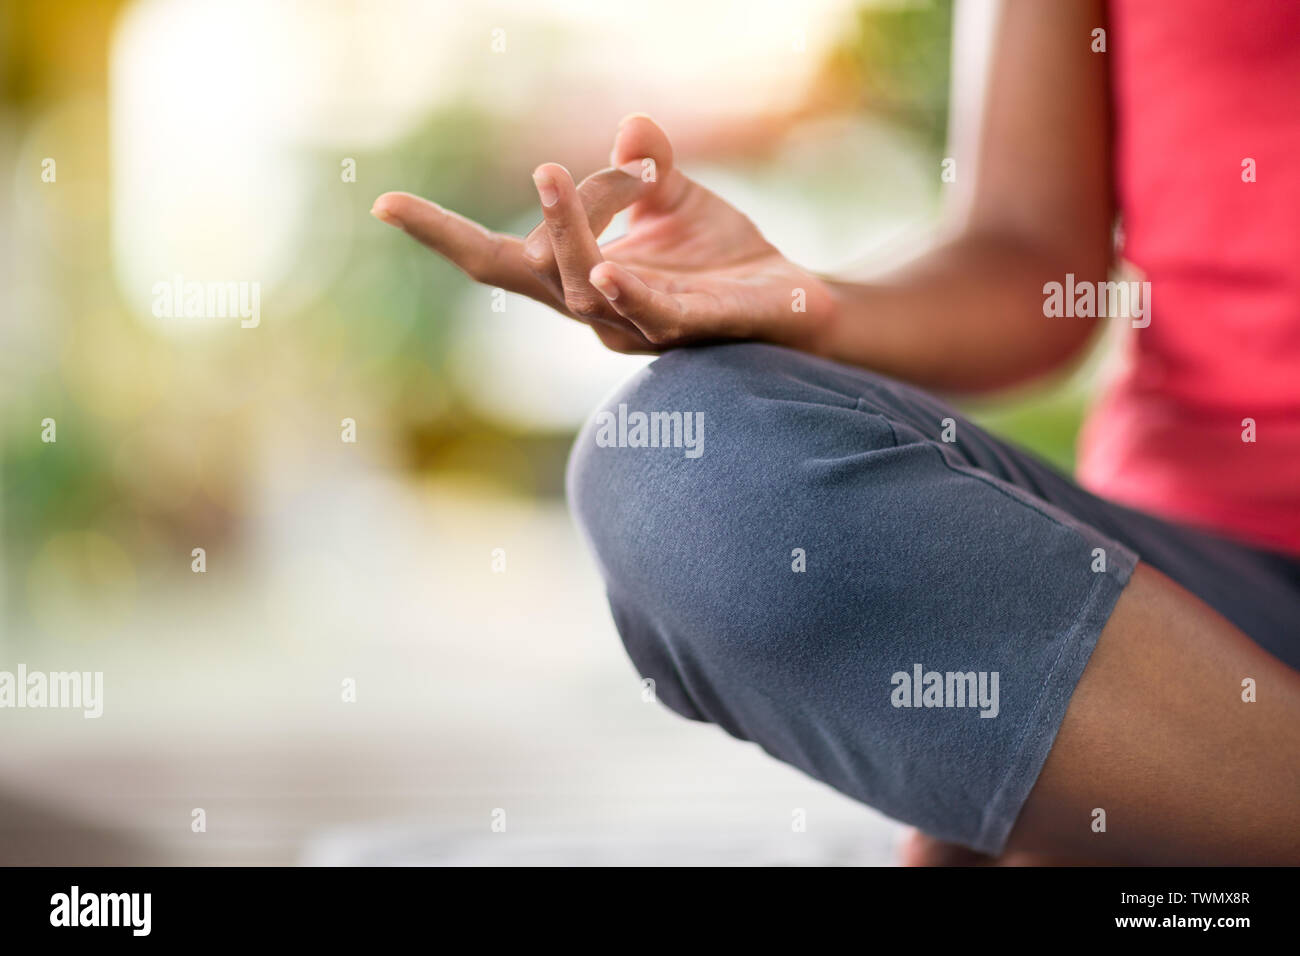 close-up detail shot of the Yoga hand position during meditation Stock Photo